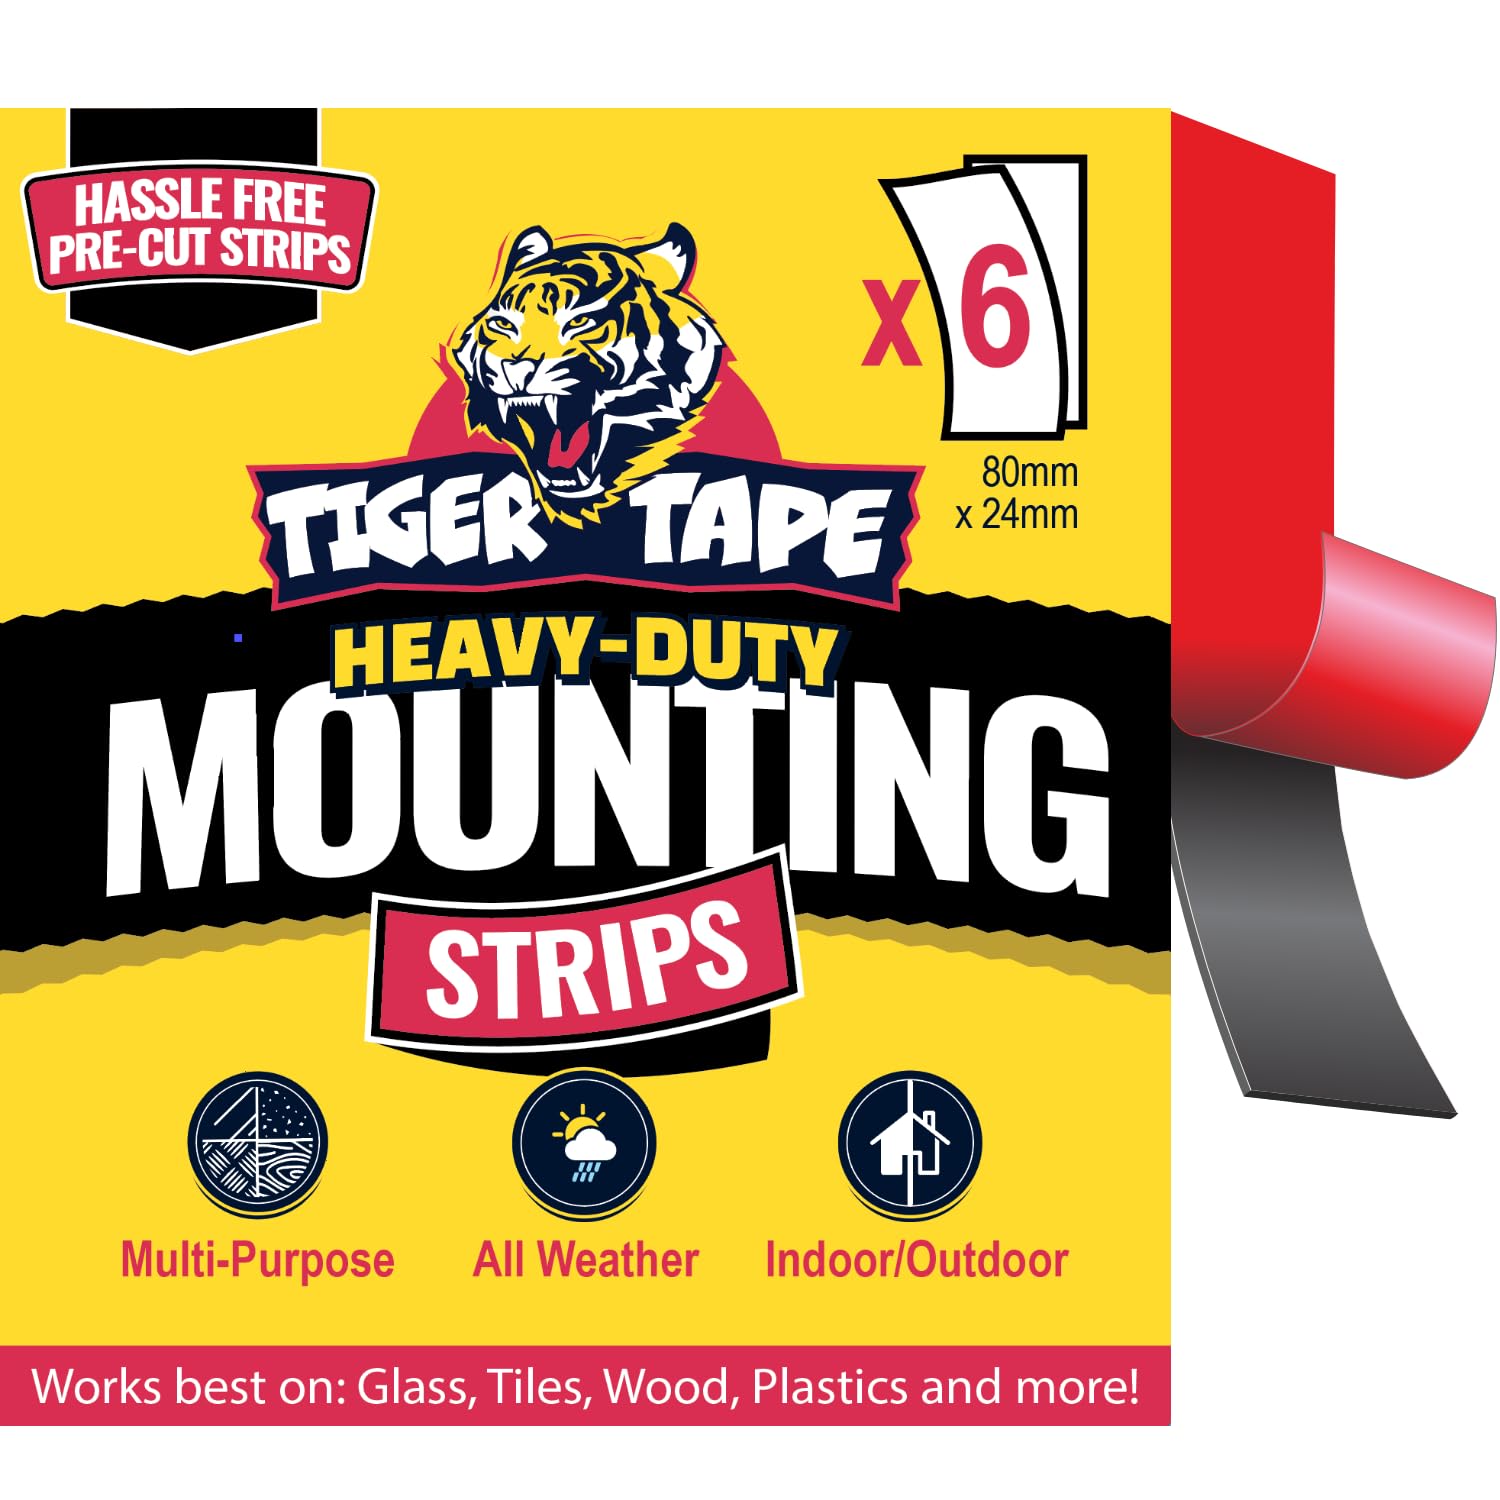 Tiger Tape Mounting Strips. Seriously Strong Pre-Cut Strips with Claw Grip Technology. Permanent Hold. Grey with Red Linder. 6 Strips (80mm x 24mm)